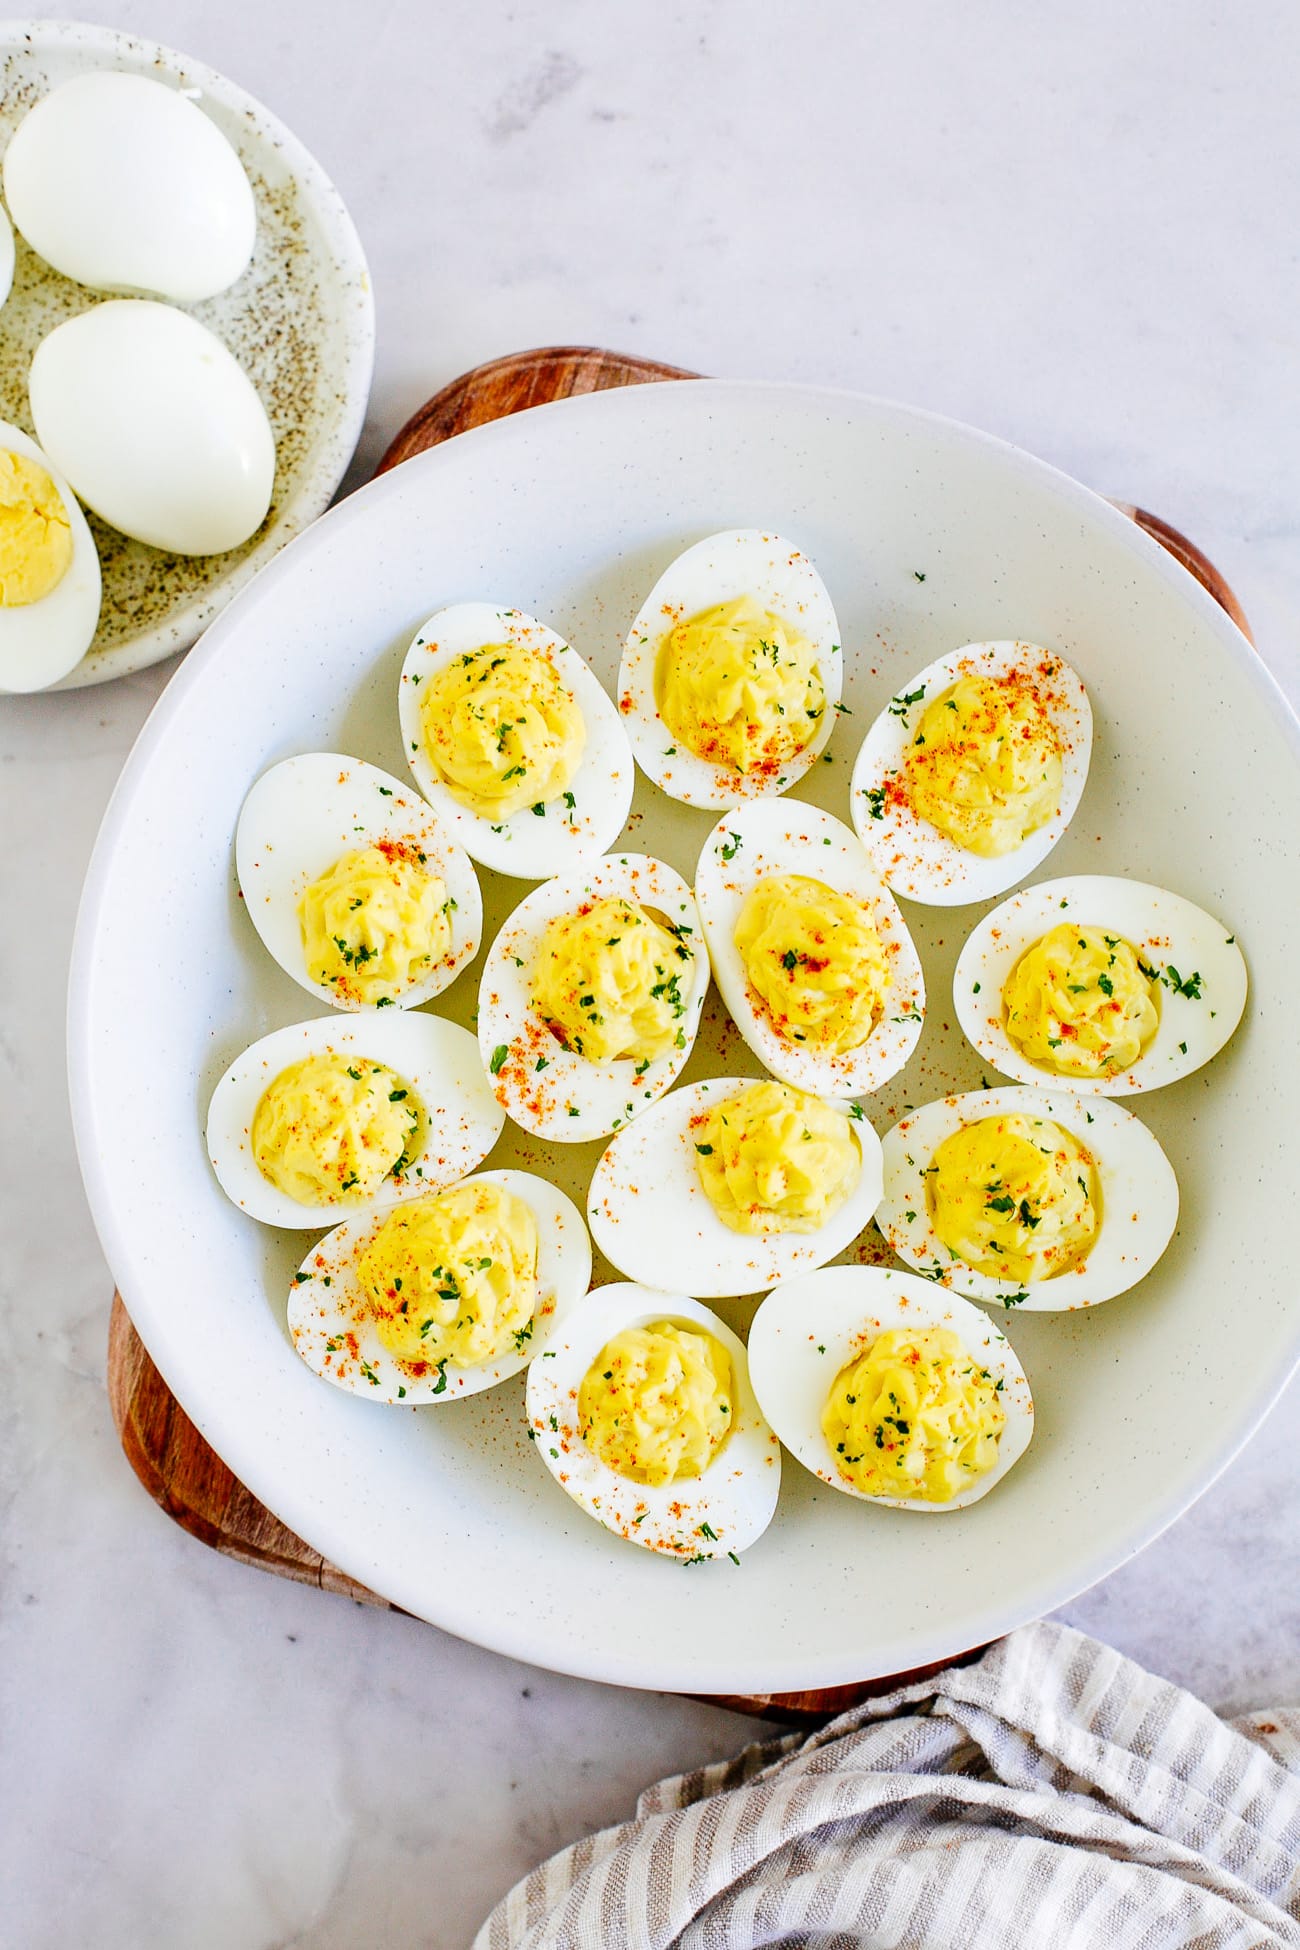 A platter of easy deviled eggs garnished with chives and paprika.